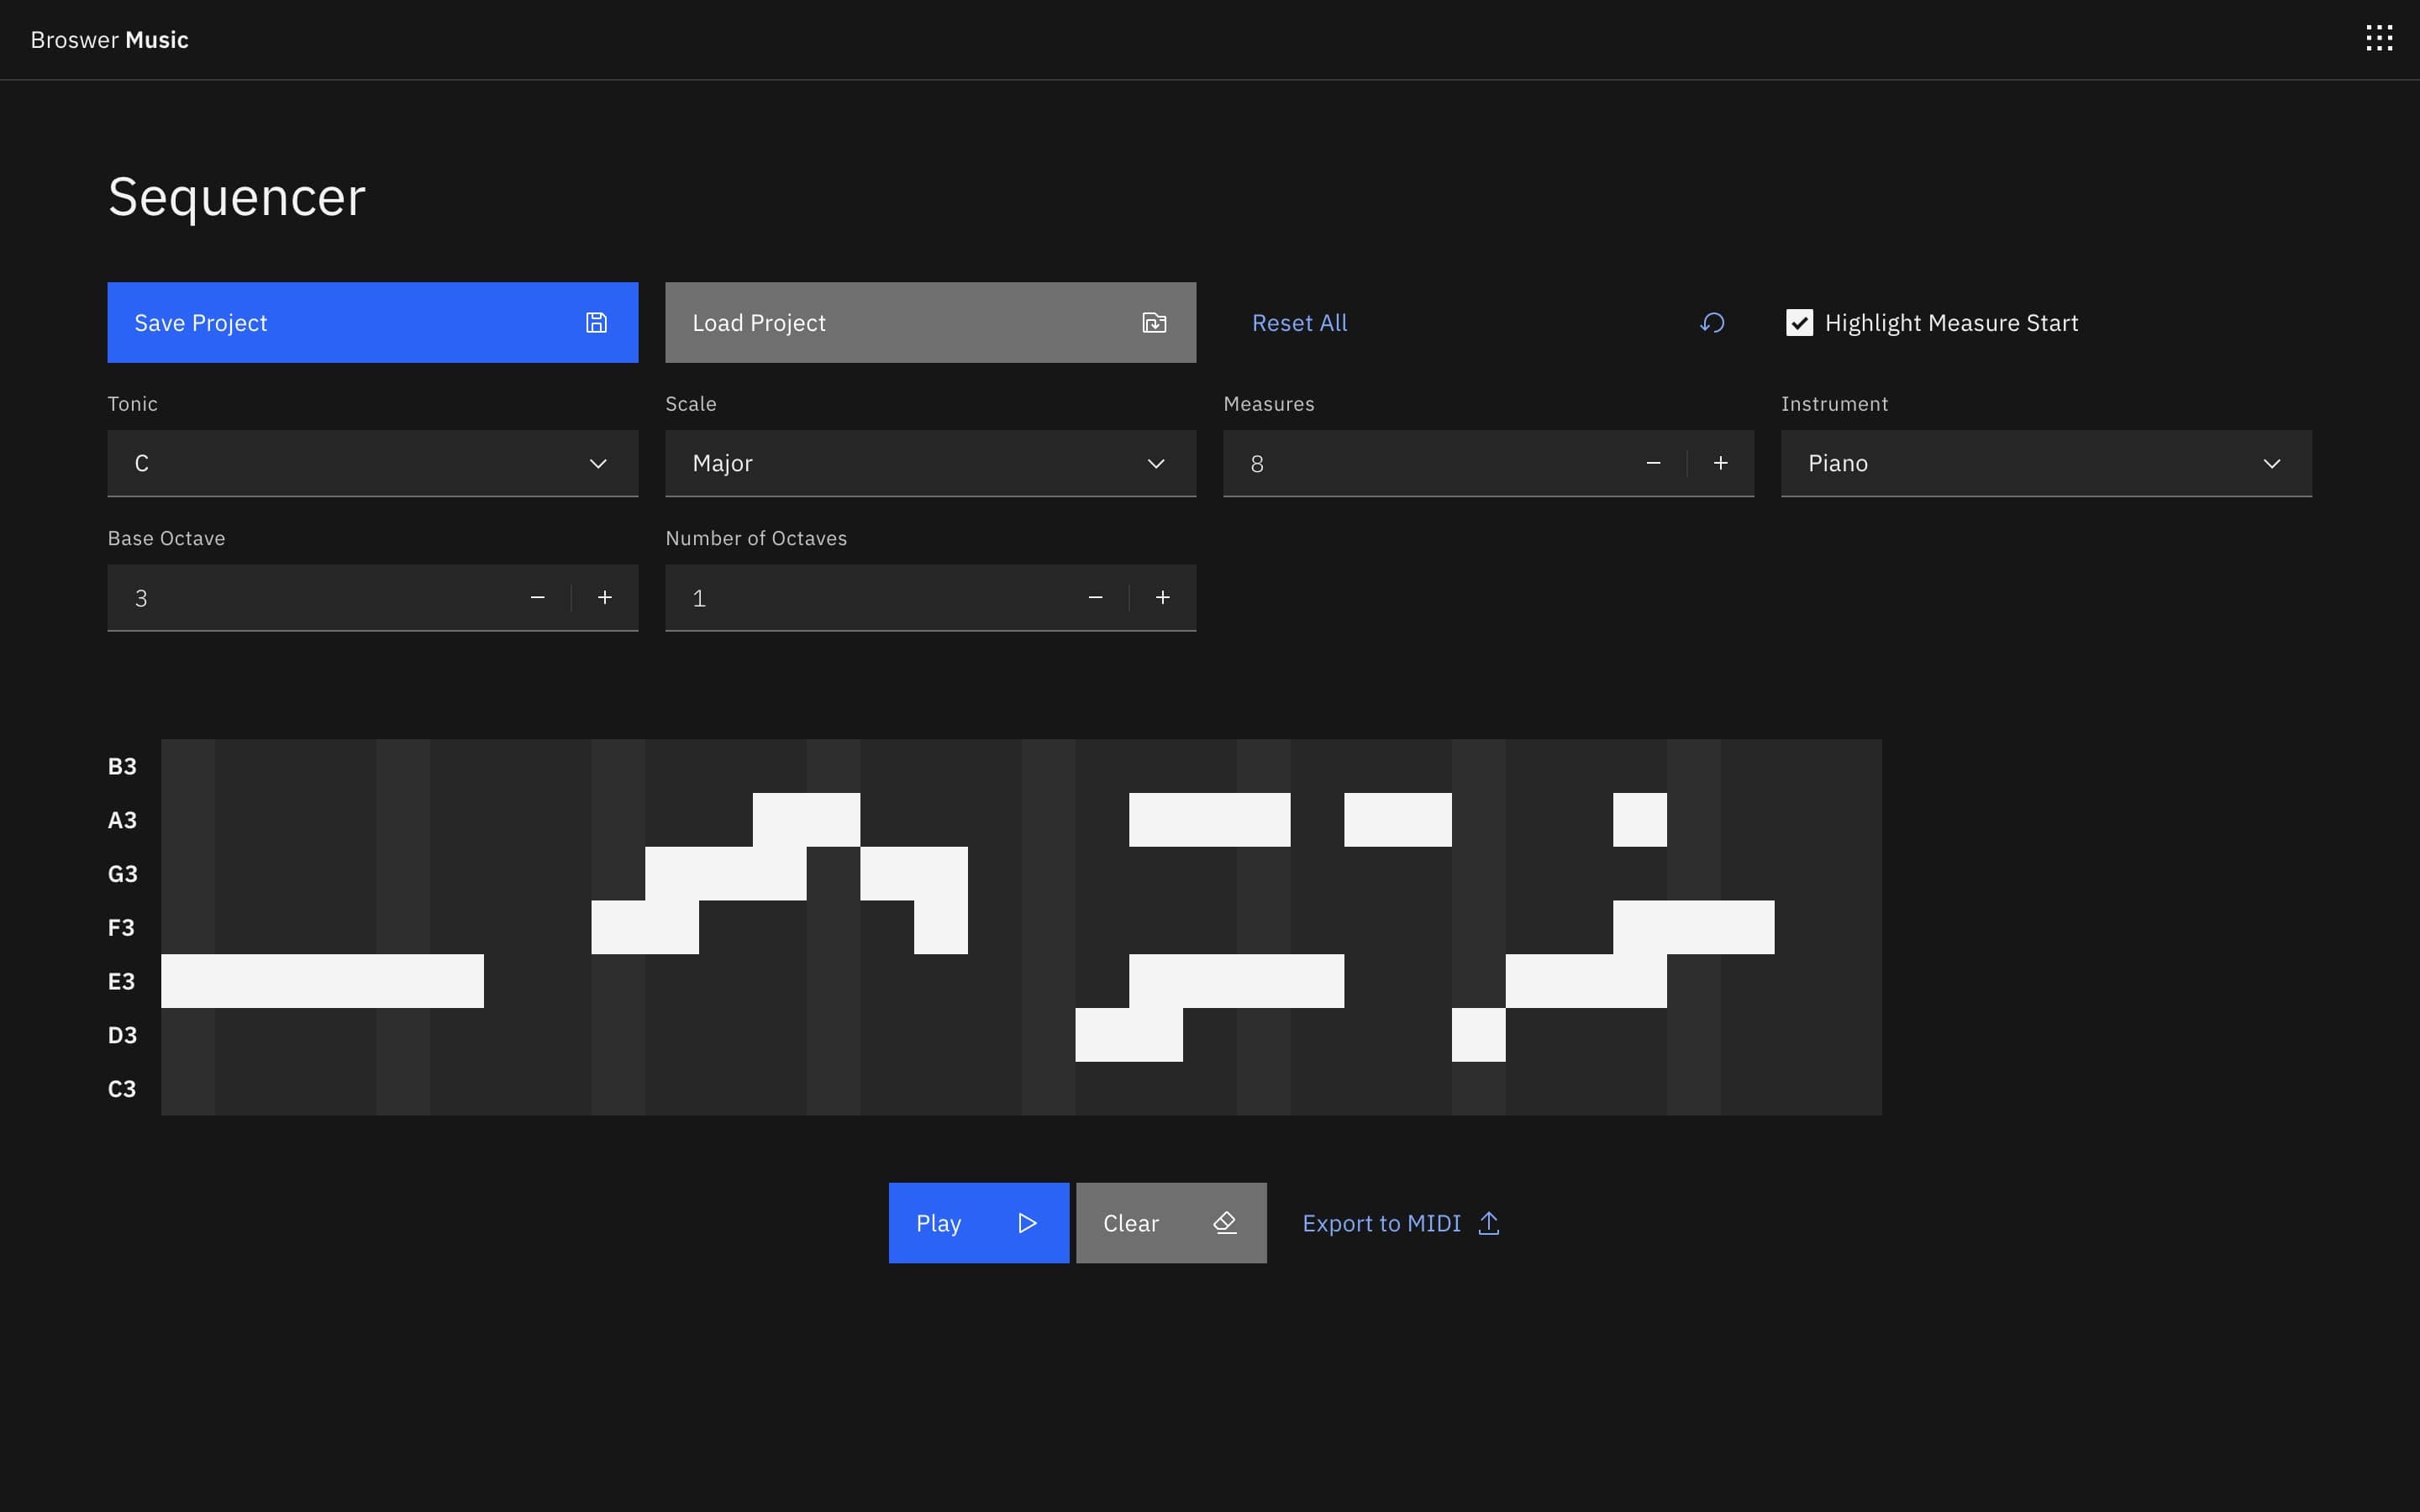 Screenshot of the browser music MIDI sequencer